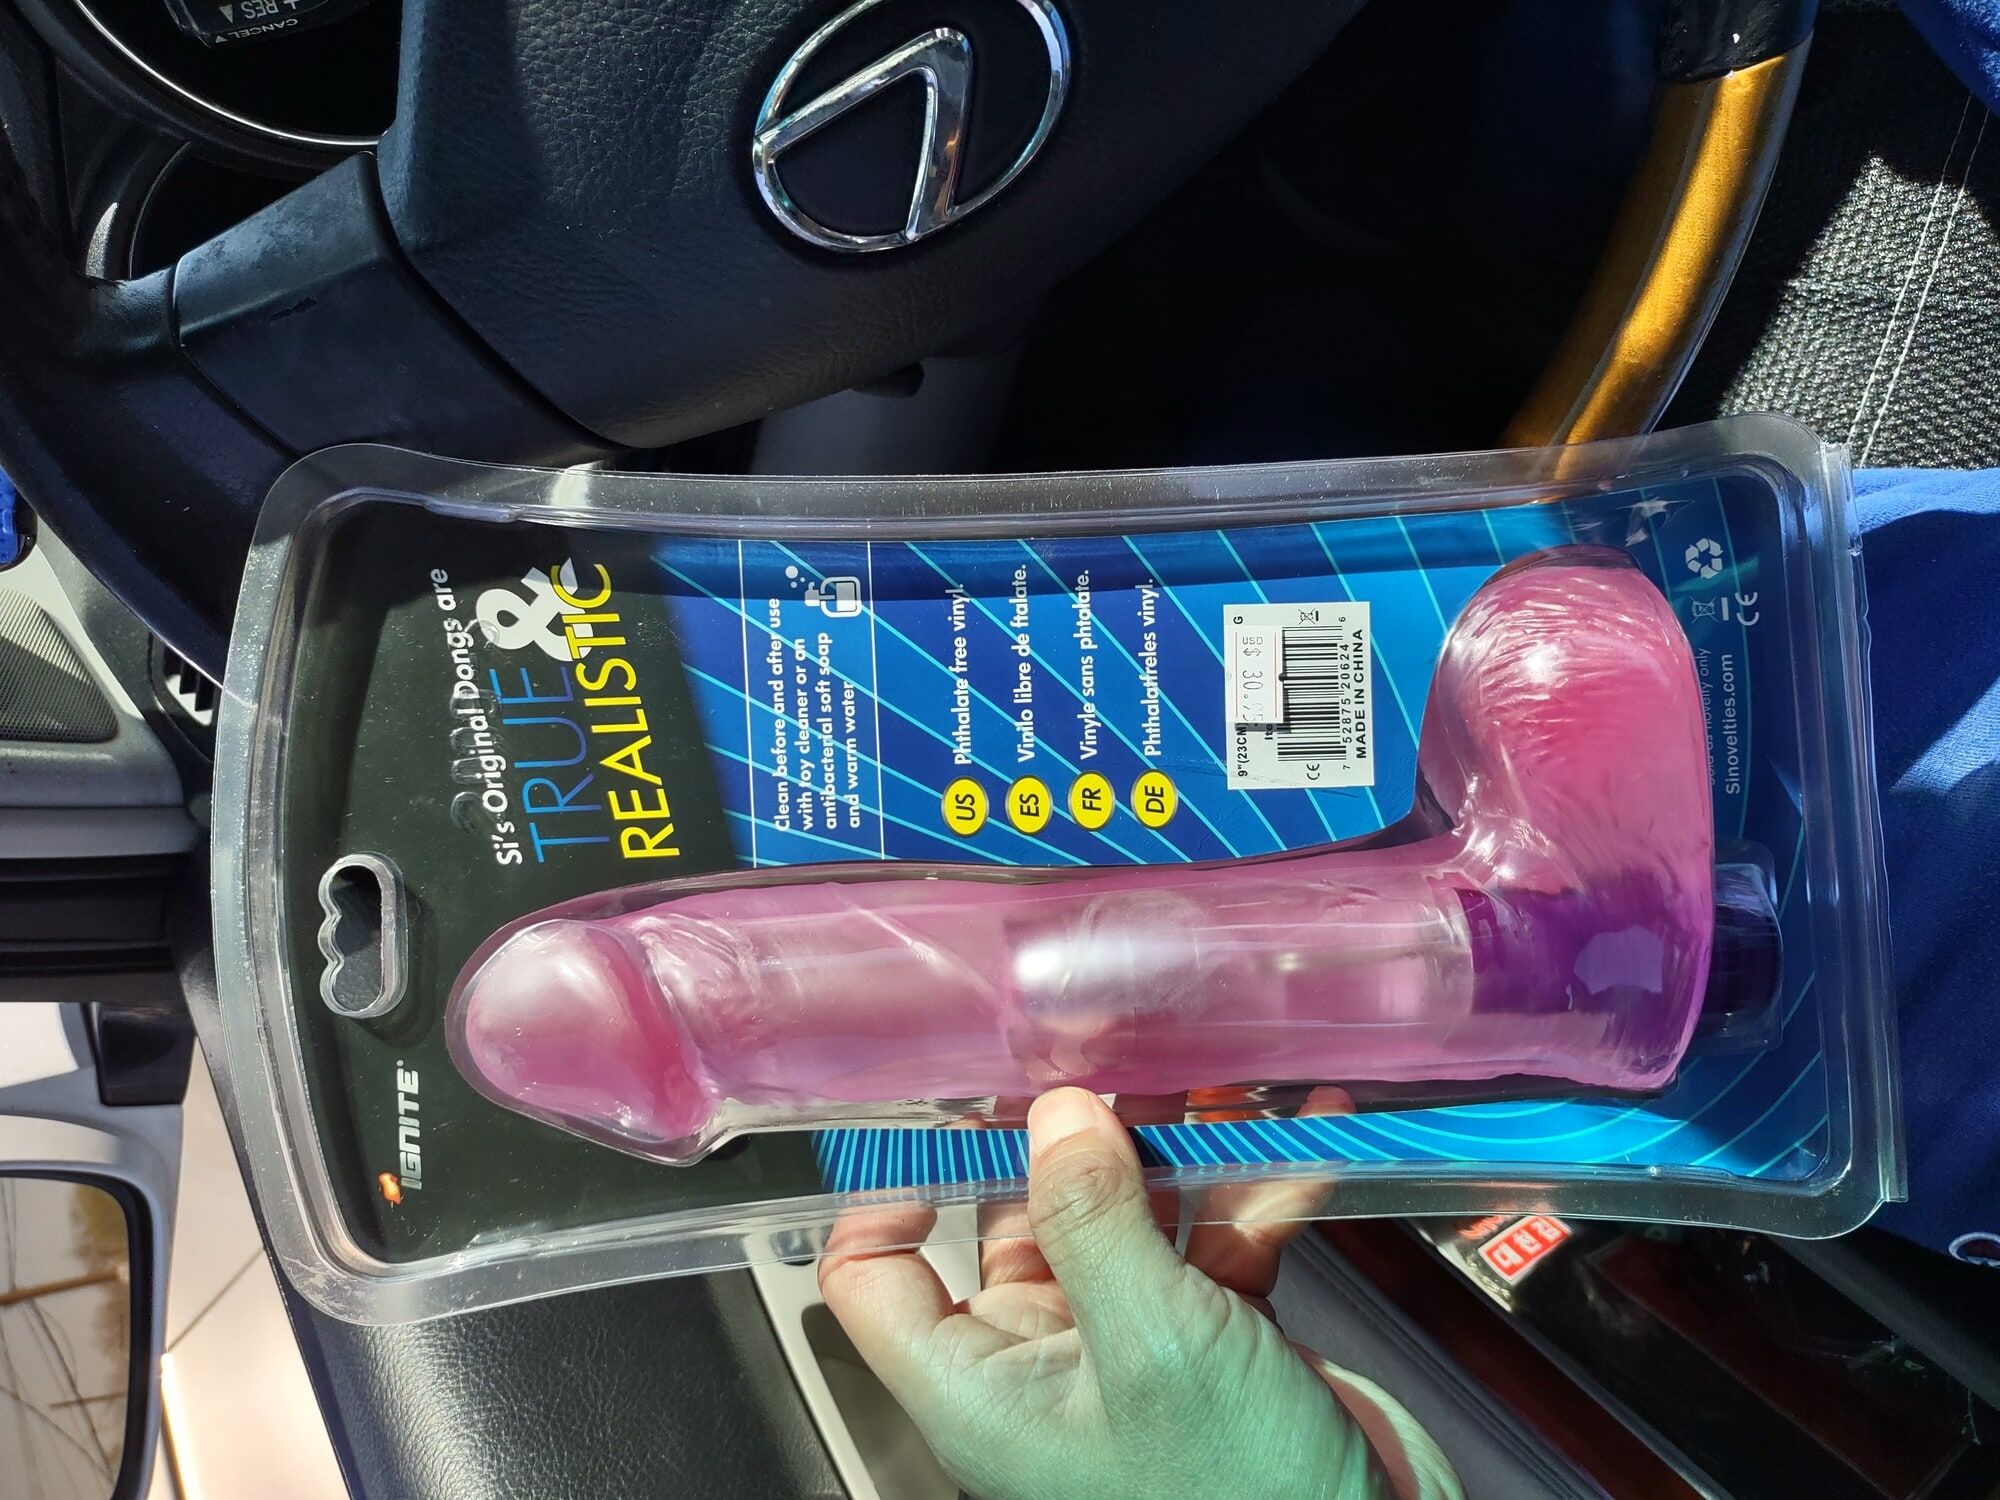 New sex toys. Hollow tubes for inserting and giant dildo #5